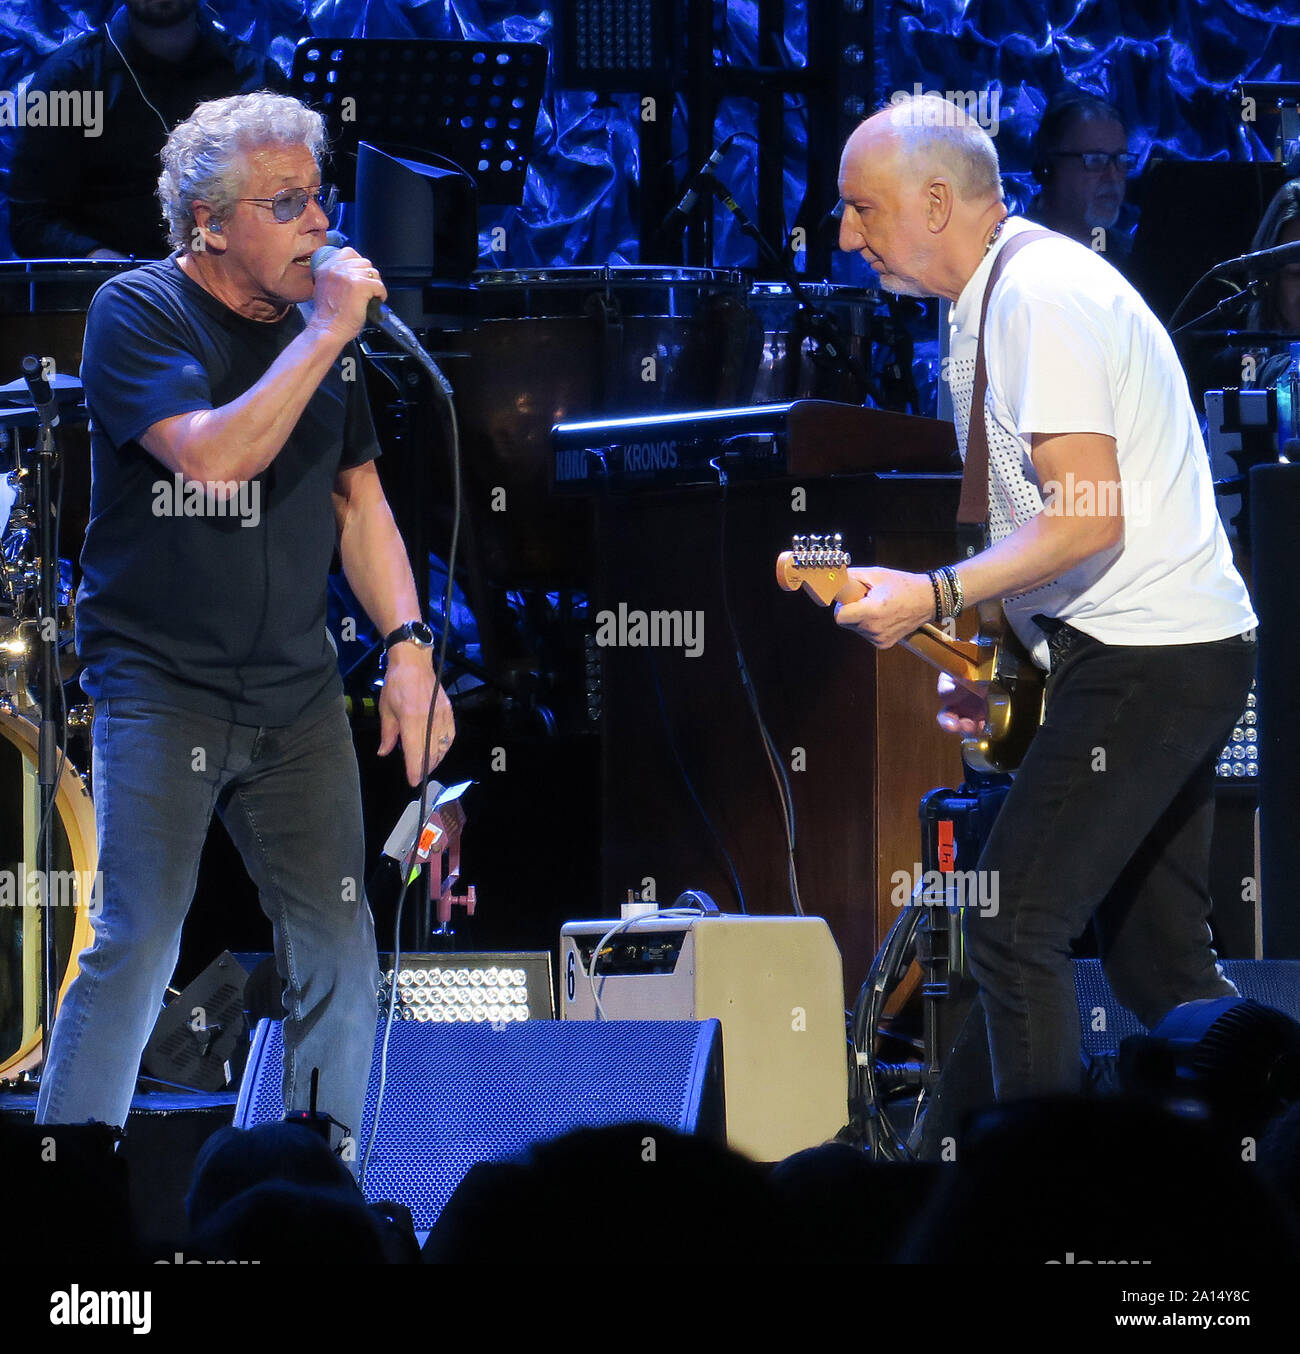 Tampa, United States. 22nd Sep, 2019. September 22, 2019 - Tampa, Florida, United States - Roger Daltrey (left) and Pete Townshend of the English rock band The Who perform at the Amalie Arena on the second leg of their Moving On! tour on September 22, 2019 in Tampa, Florida. Credit: Paul Hennessy/Alamy Live News Stock Photo